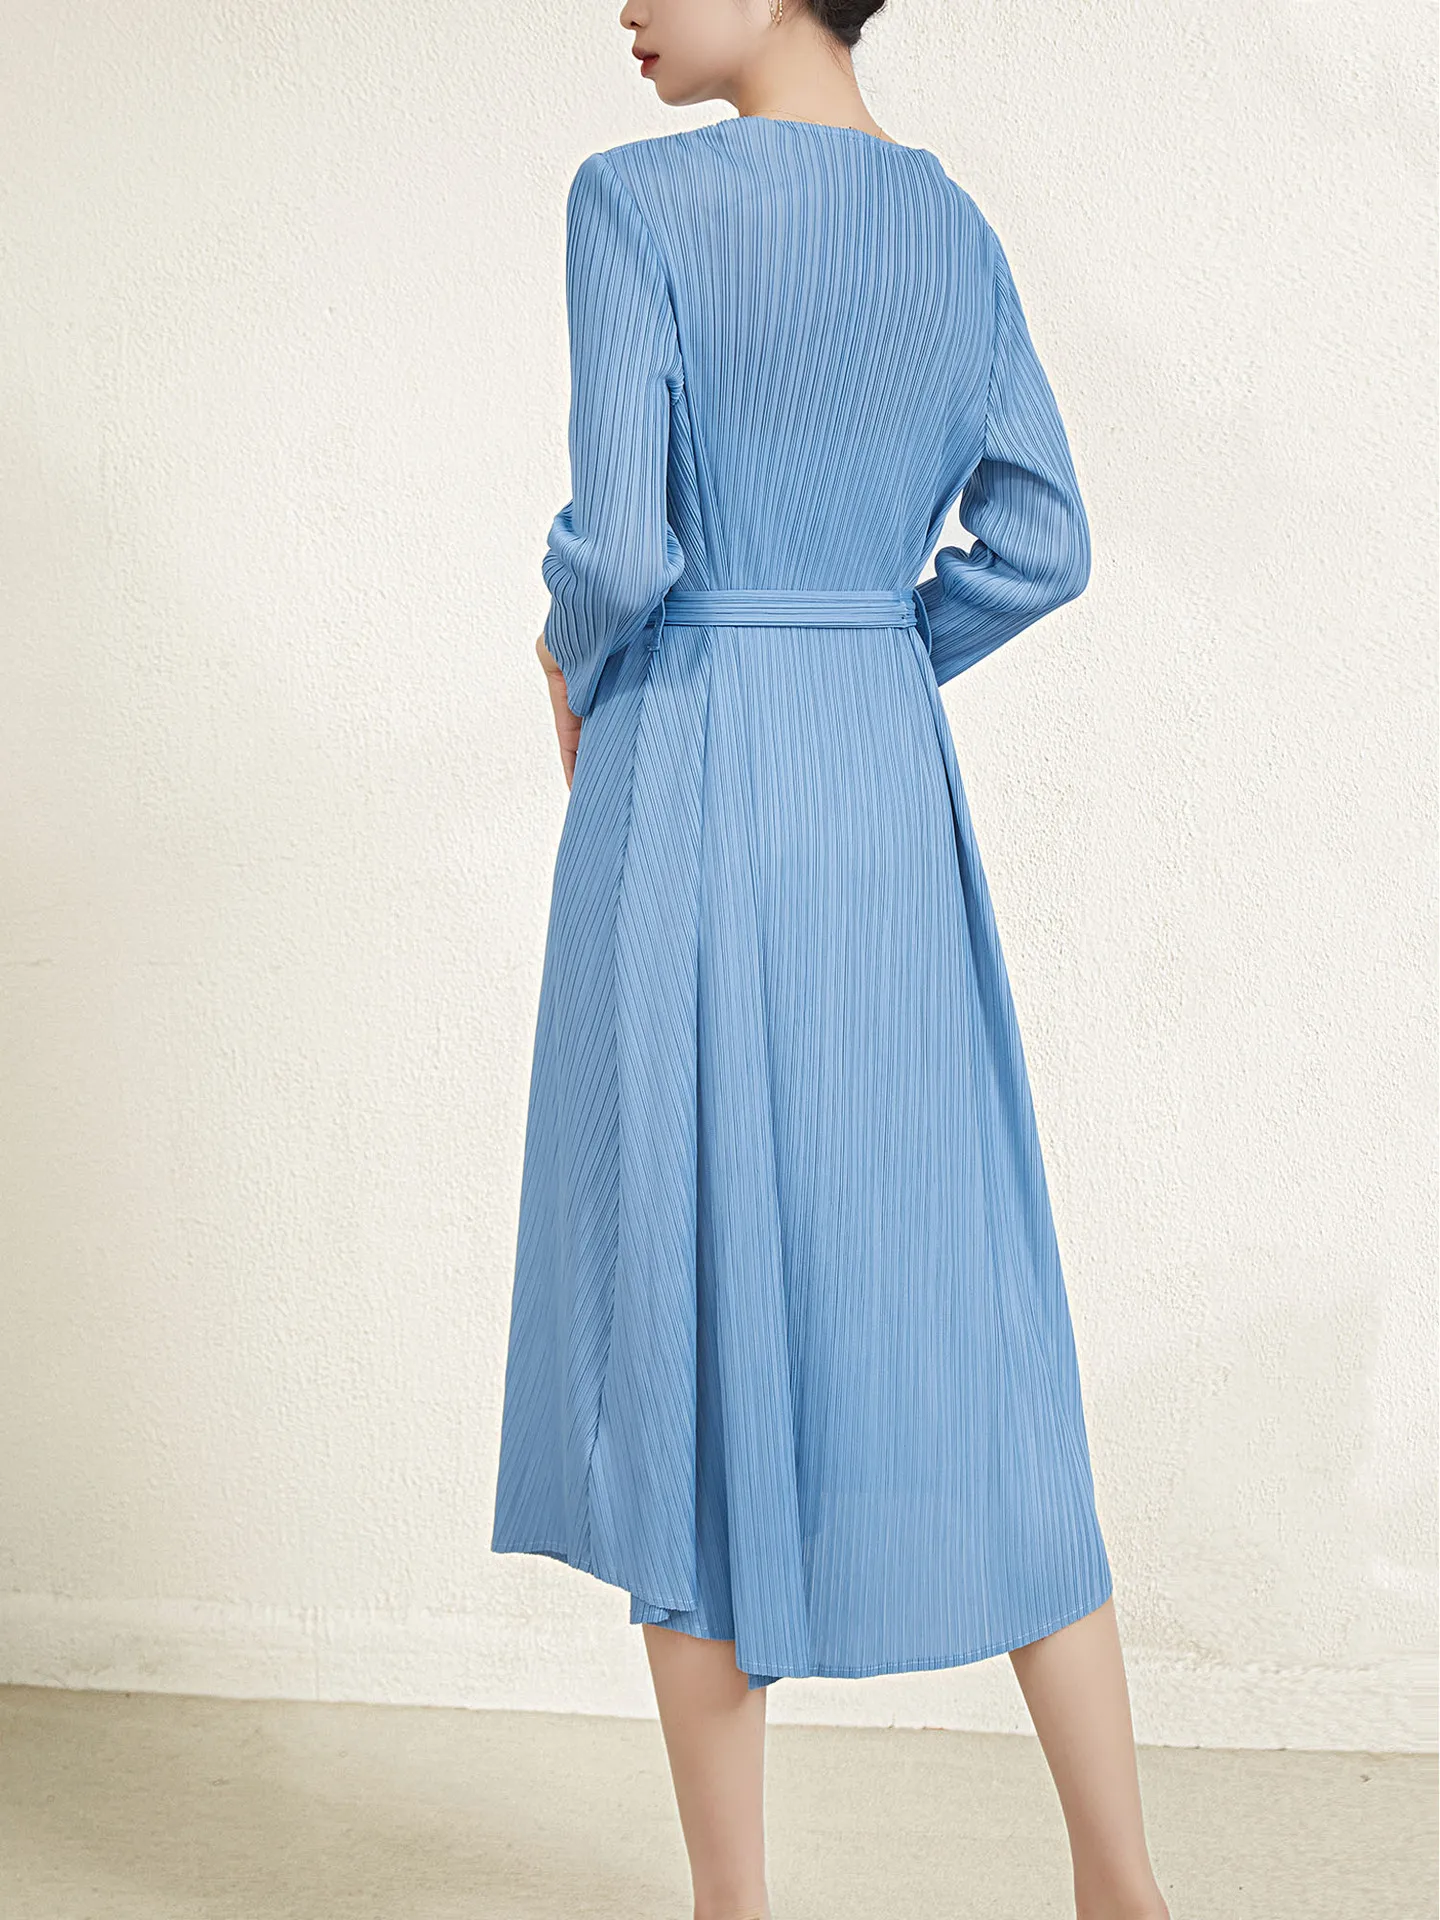 pleated-solid-color-dress-women's-long-sleeved-loose-large-size-single-row-multi-buckle-slim-look-age-reducing-long-dress